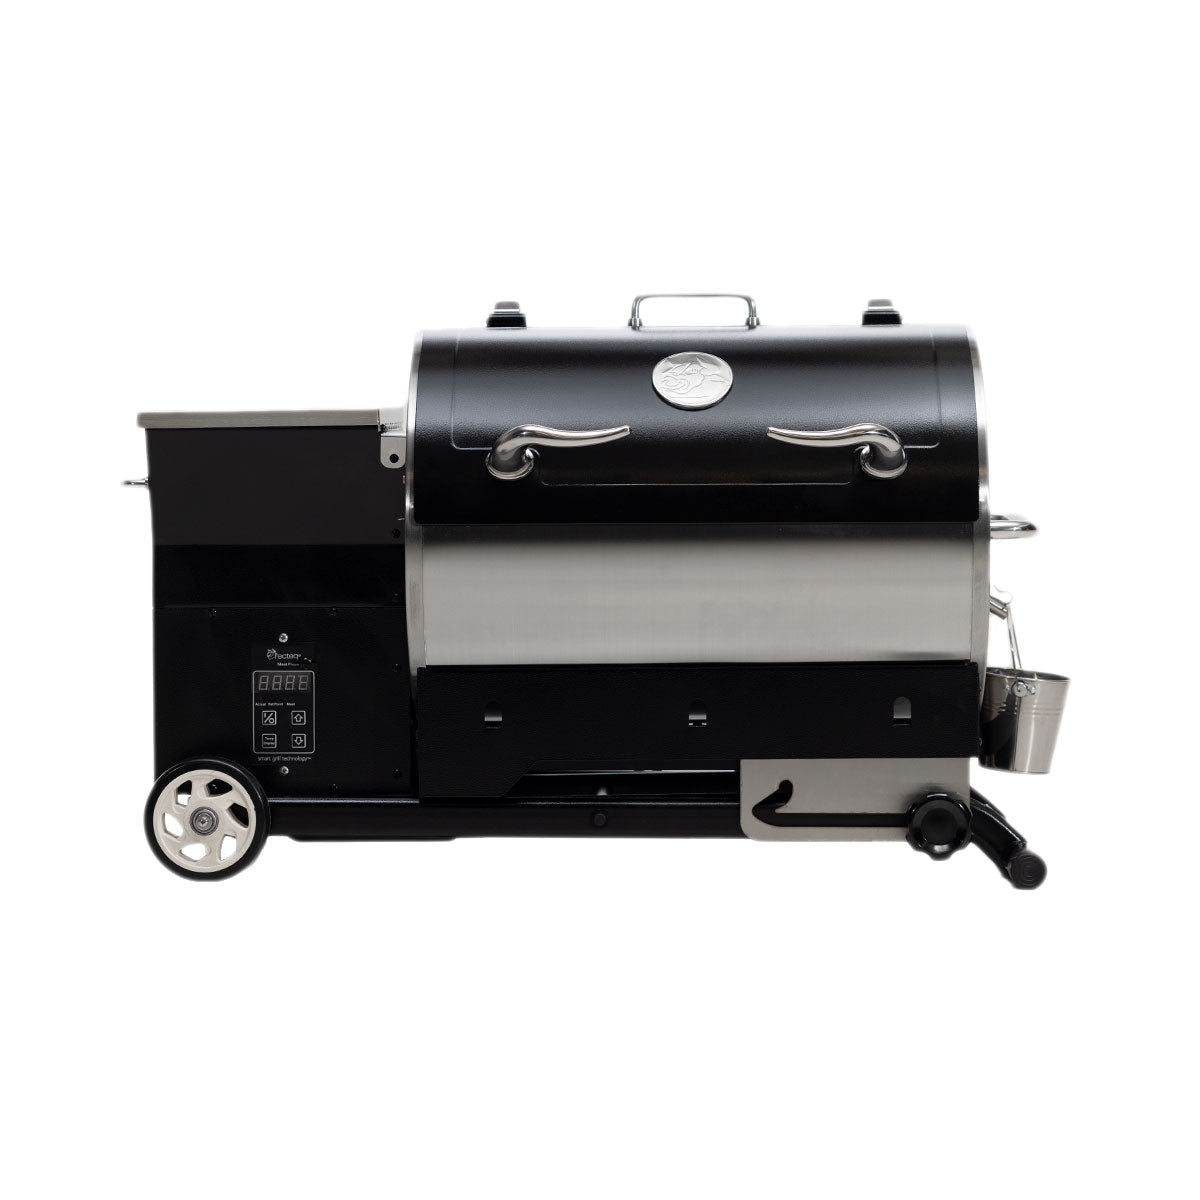  recteq Road Warrior 340 Portable Pellet Grill, Electric  Pellet Smoker Grill, BBQ Grill, Outdoor Grill - Wood Pellets - Grill, Sear,  Smoke, and More!